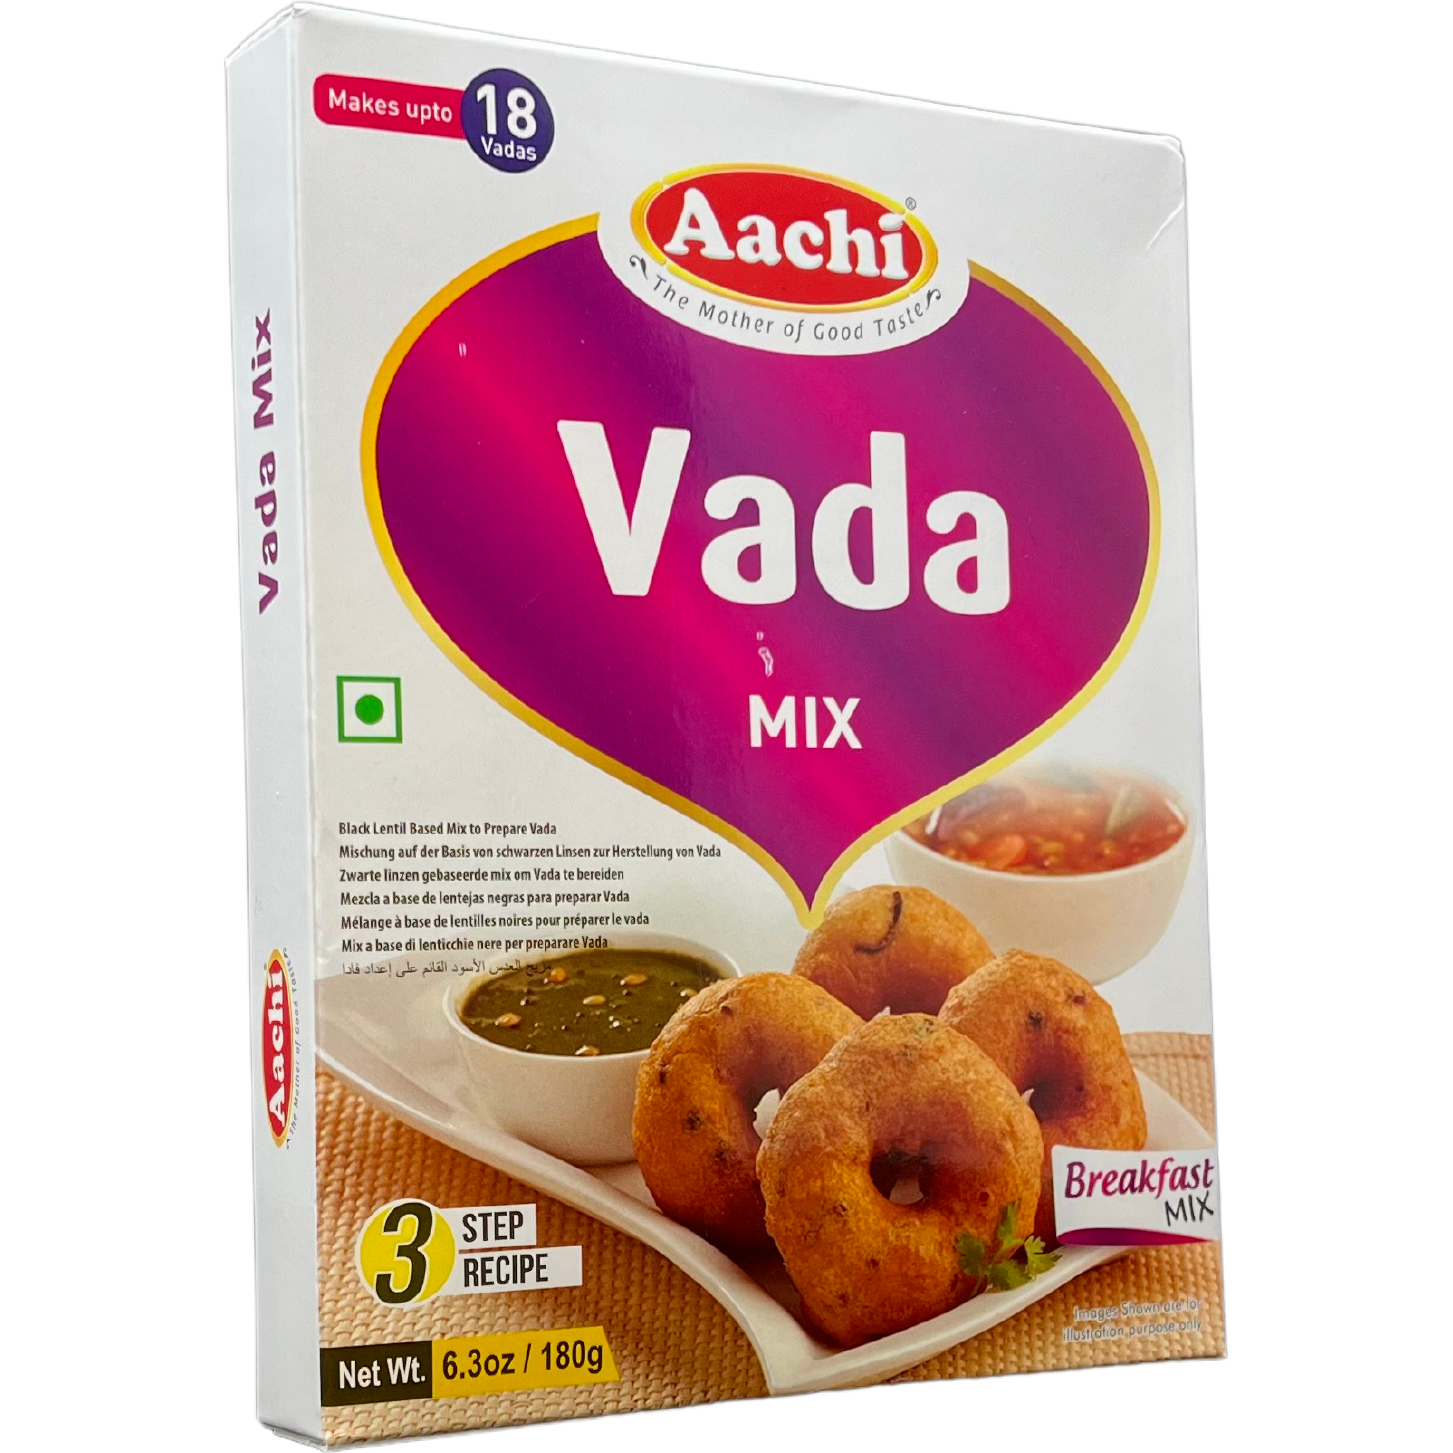 Pack of 5 - Aachi Vada Mix - 200 Gm (7 Oz)